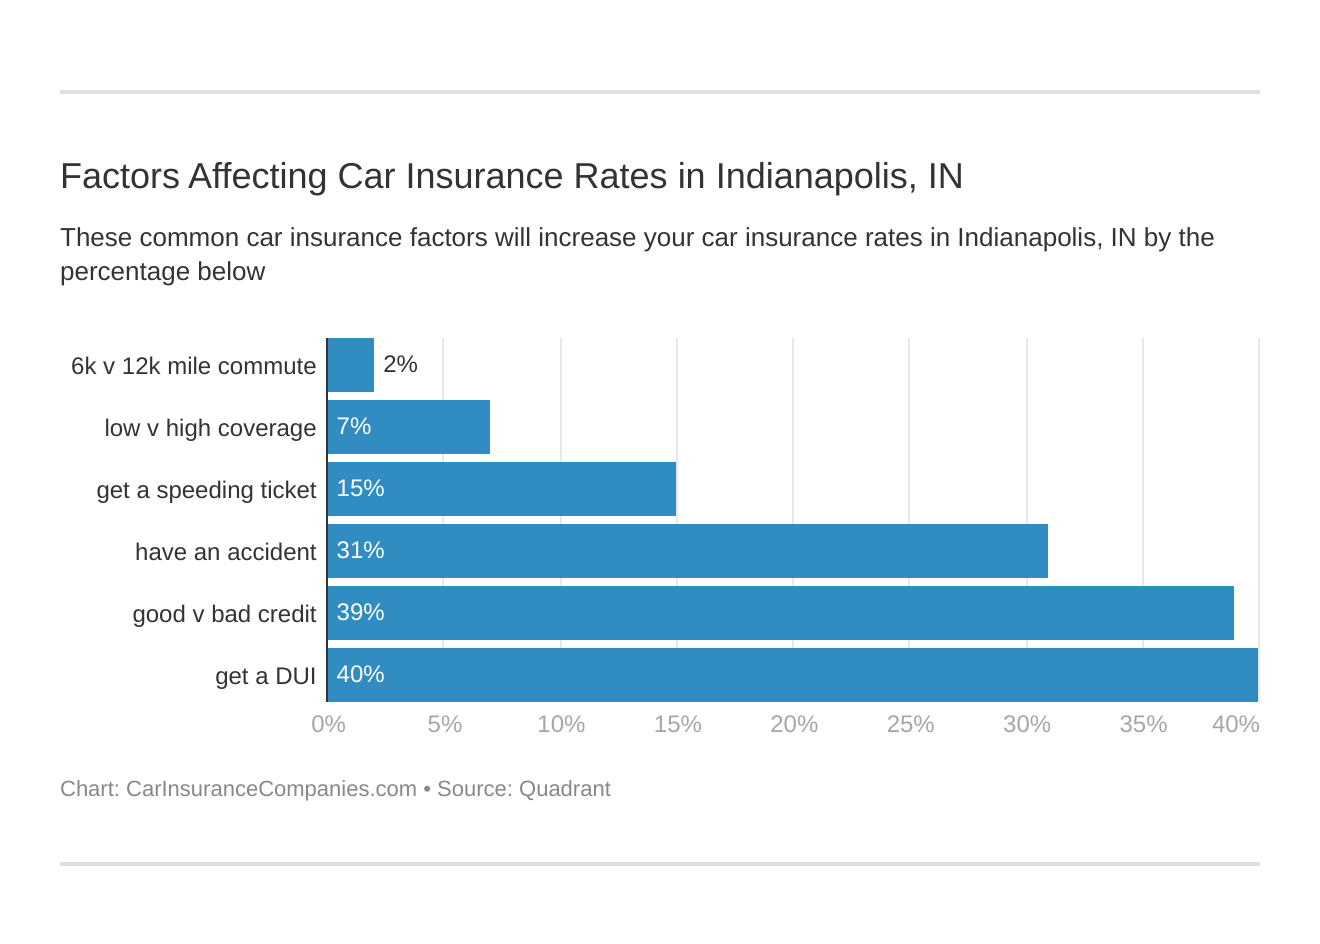 Factors Affecting Car Insurance Rates in Indianapolis, IN